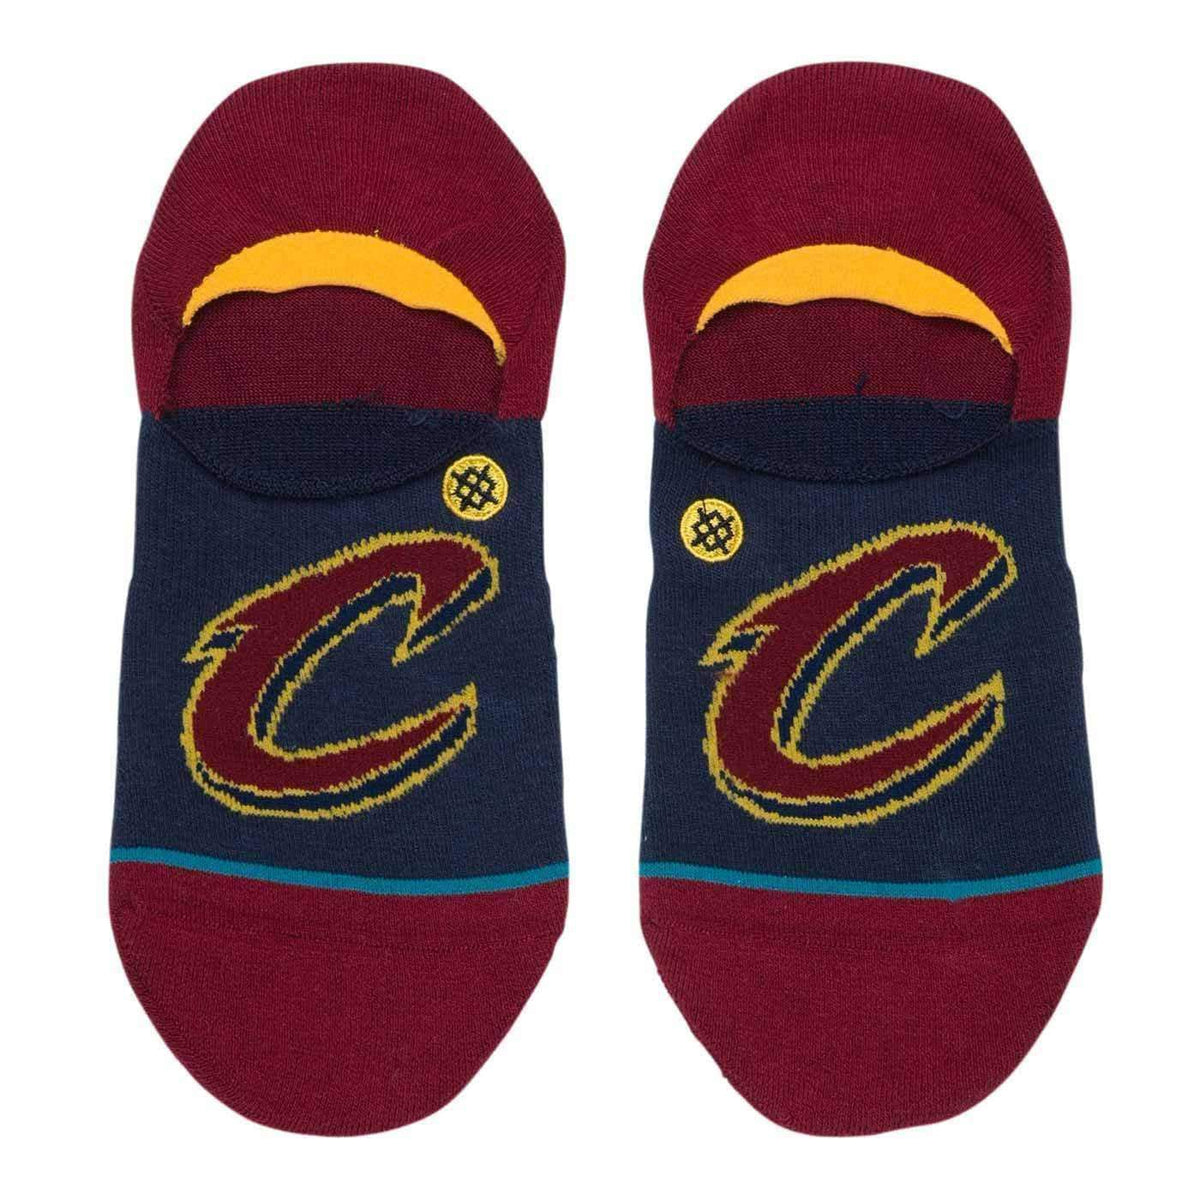 Stance NBA Arena Cavs Invisible Low Socks in Burgundy Mens Low/Ankle Socks by Stance